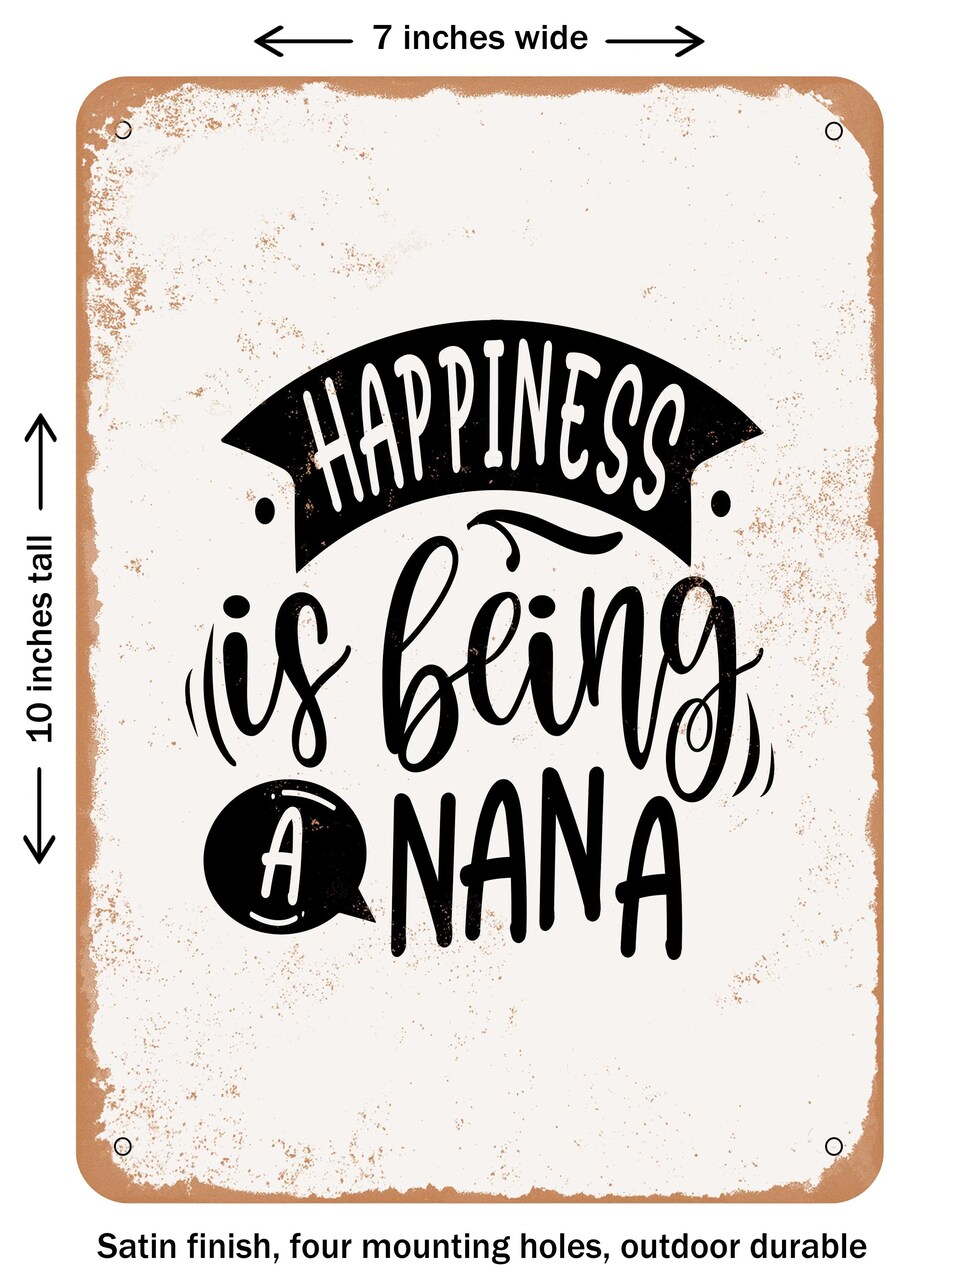 DECORATIVE METAL SIGN - Happiness is Being a Nana - 3  - Vintage Rusty Look